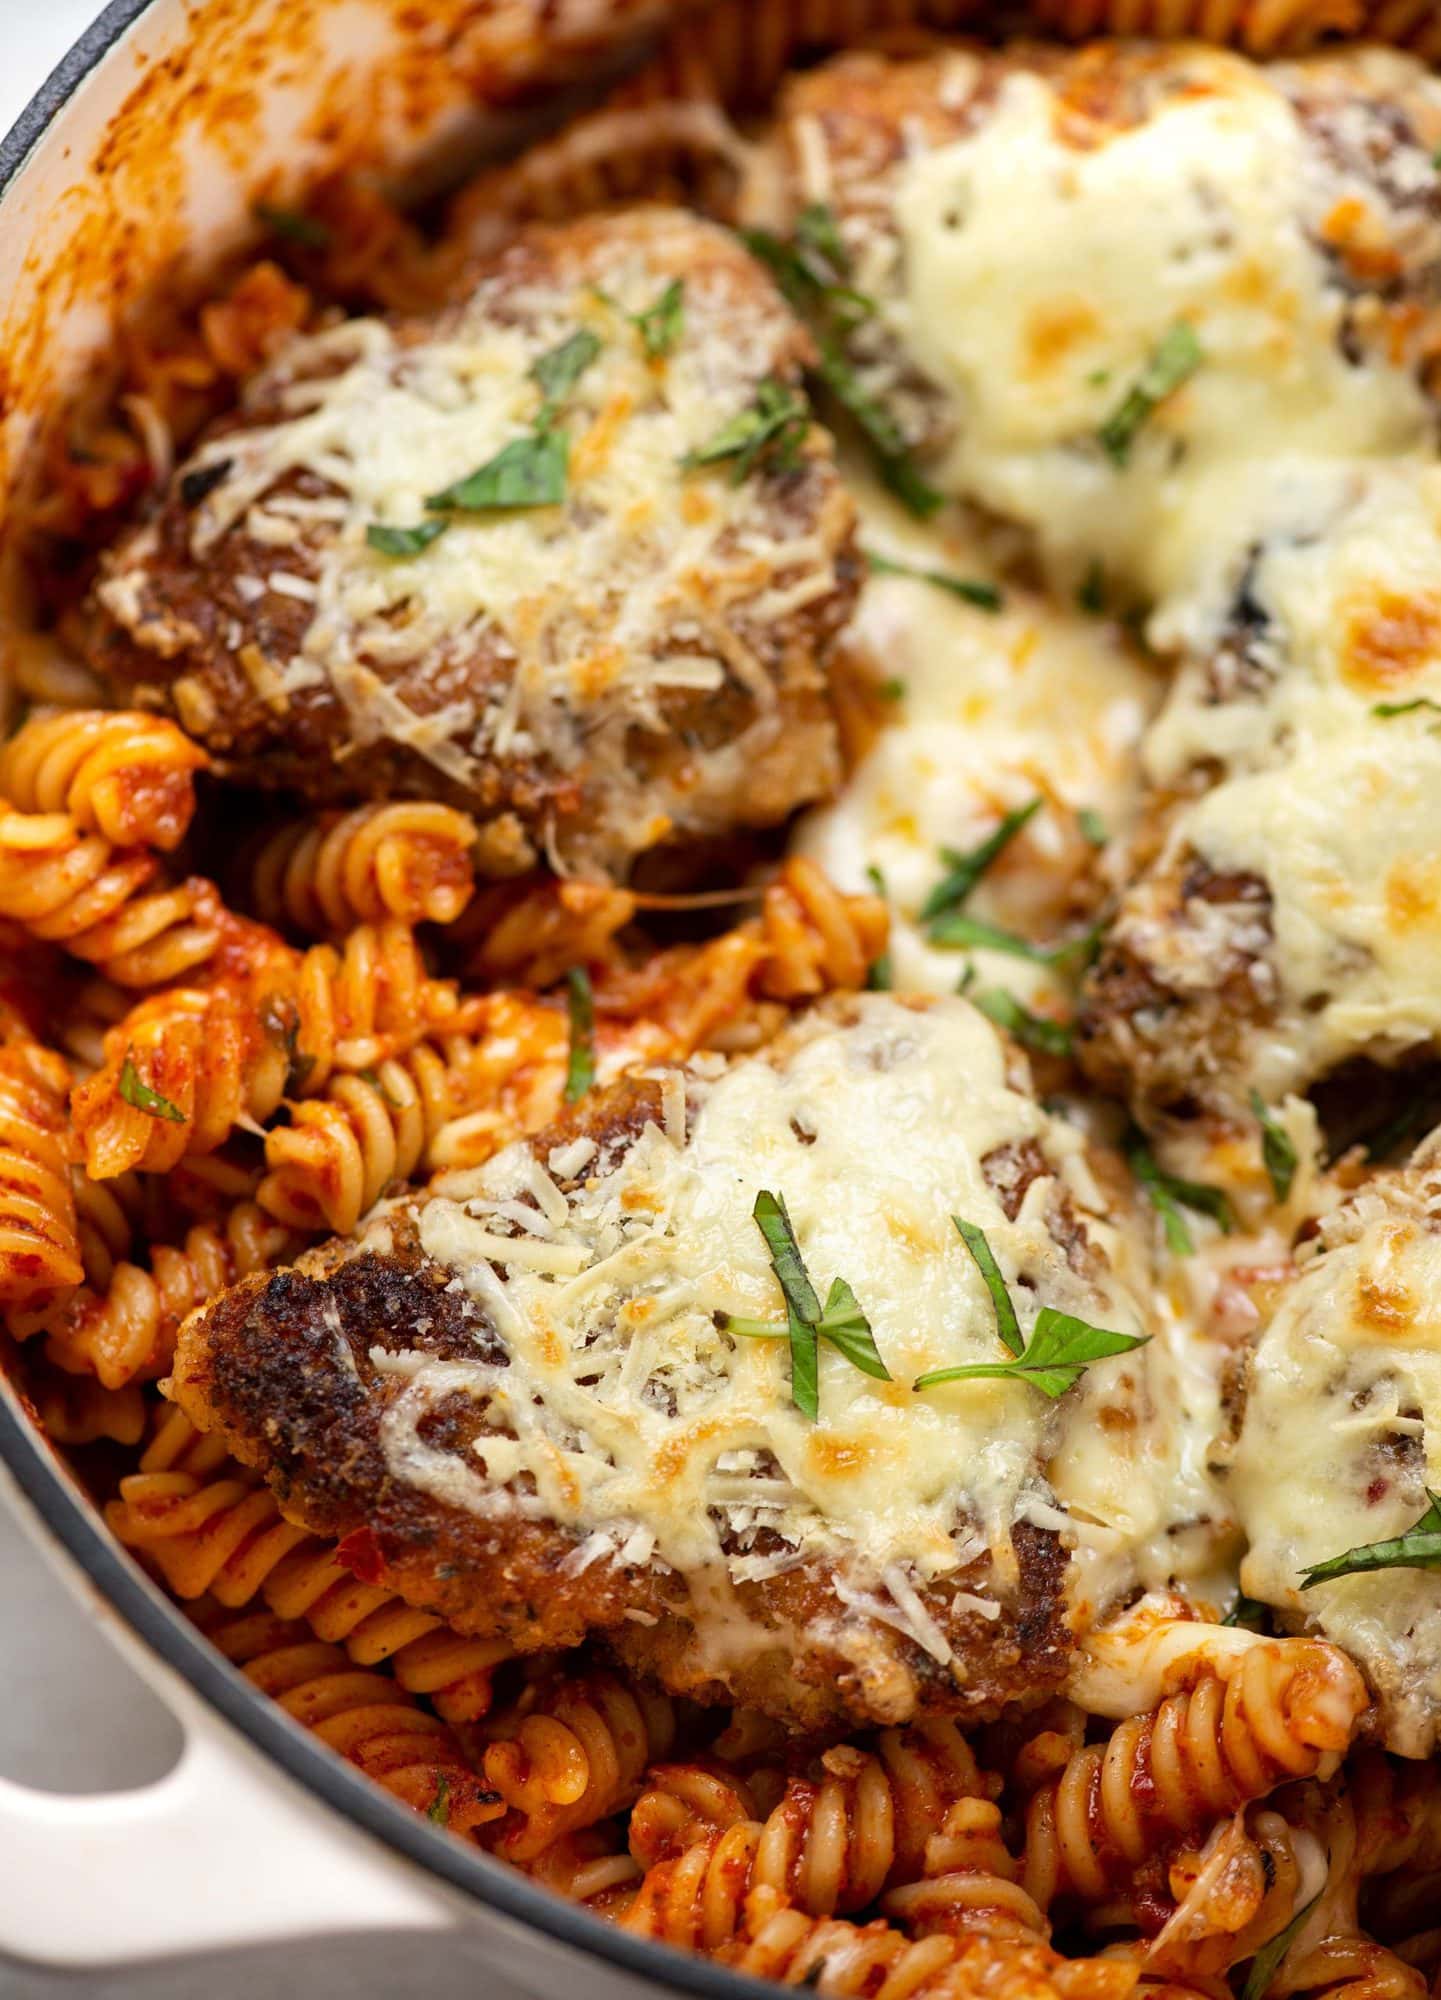 This chicken parmesan pasta has all-time favourite Chicken Parmesan and pasta combined in one dish. An easy one-pot dinner recipe that takes 30 minutes to make and needs minimal cleanup